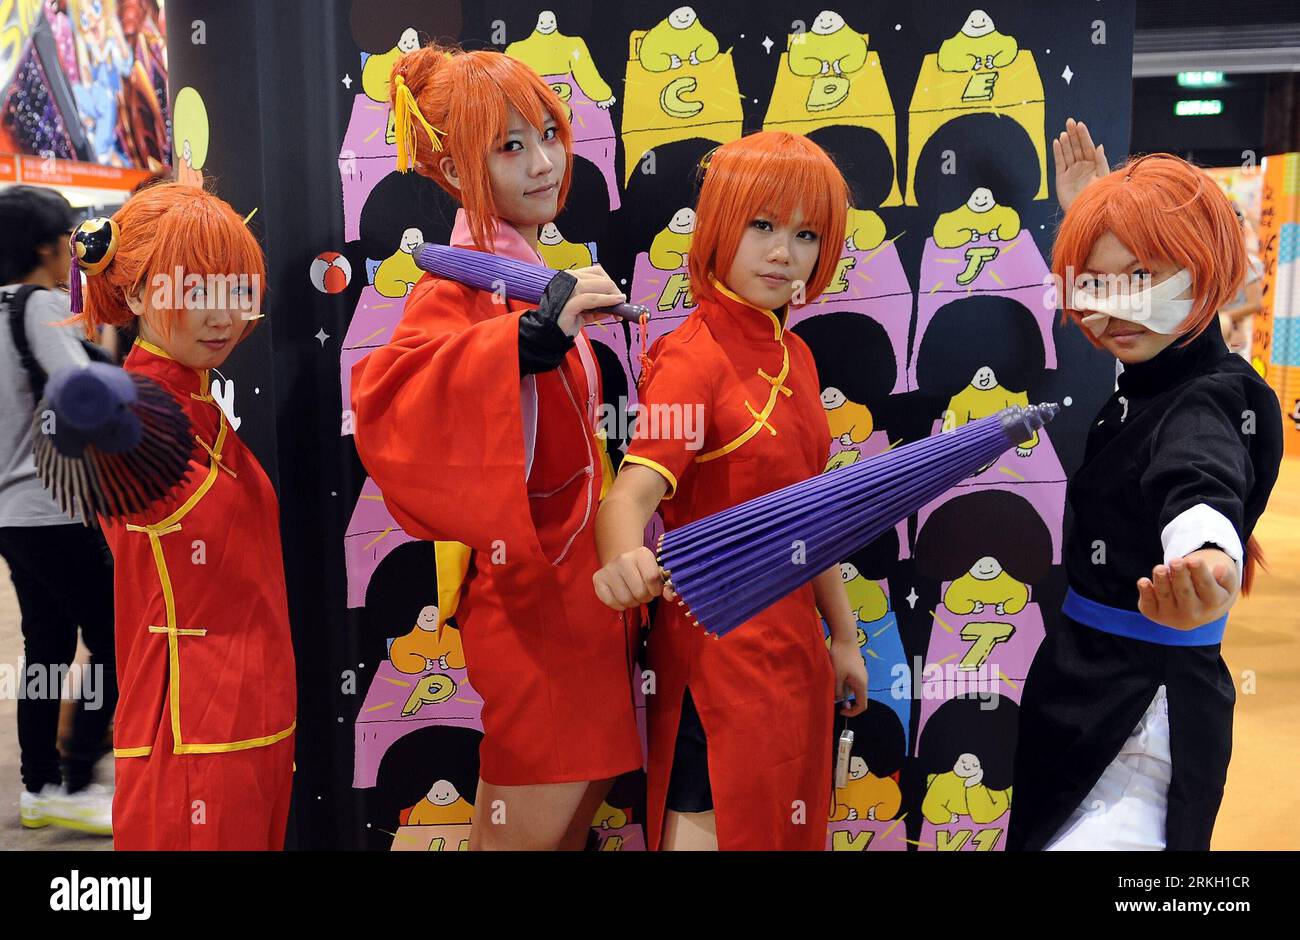 Bildnummer: 55675143  Datum: 02.08.2011  Copyright: imago/Xinhua (110802) -- HONG KONG, Aug. 2, 2011 (Xinhua) -- Anime fans dress themselves as their favourite animation characters at the Hong Kong Convention and Exhibition Centre in south China s Hong Kong, Aug. 2, 2011. The 13th Ani-Com & Games Hong Kong closed here Tuesday. Nearly 700,000 fans and industry insiders from across the globe visited the five-day animation festival. (Xinhua/Chen Xiaowei) (hy) (ljh) CHINA-HONG KONG-ANIMATION FESTIVAL (CN) PUBLICATIONxNOTxINxCHN Gesellschaft Messe Spielemesse Cartoonmesse Computerspiel Hongkong xtm Stock Photo